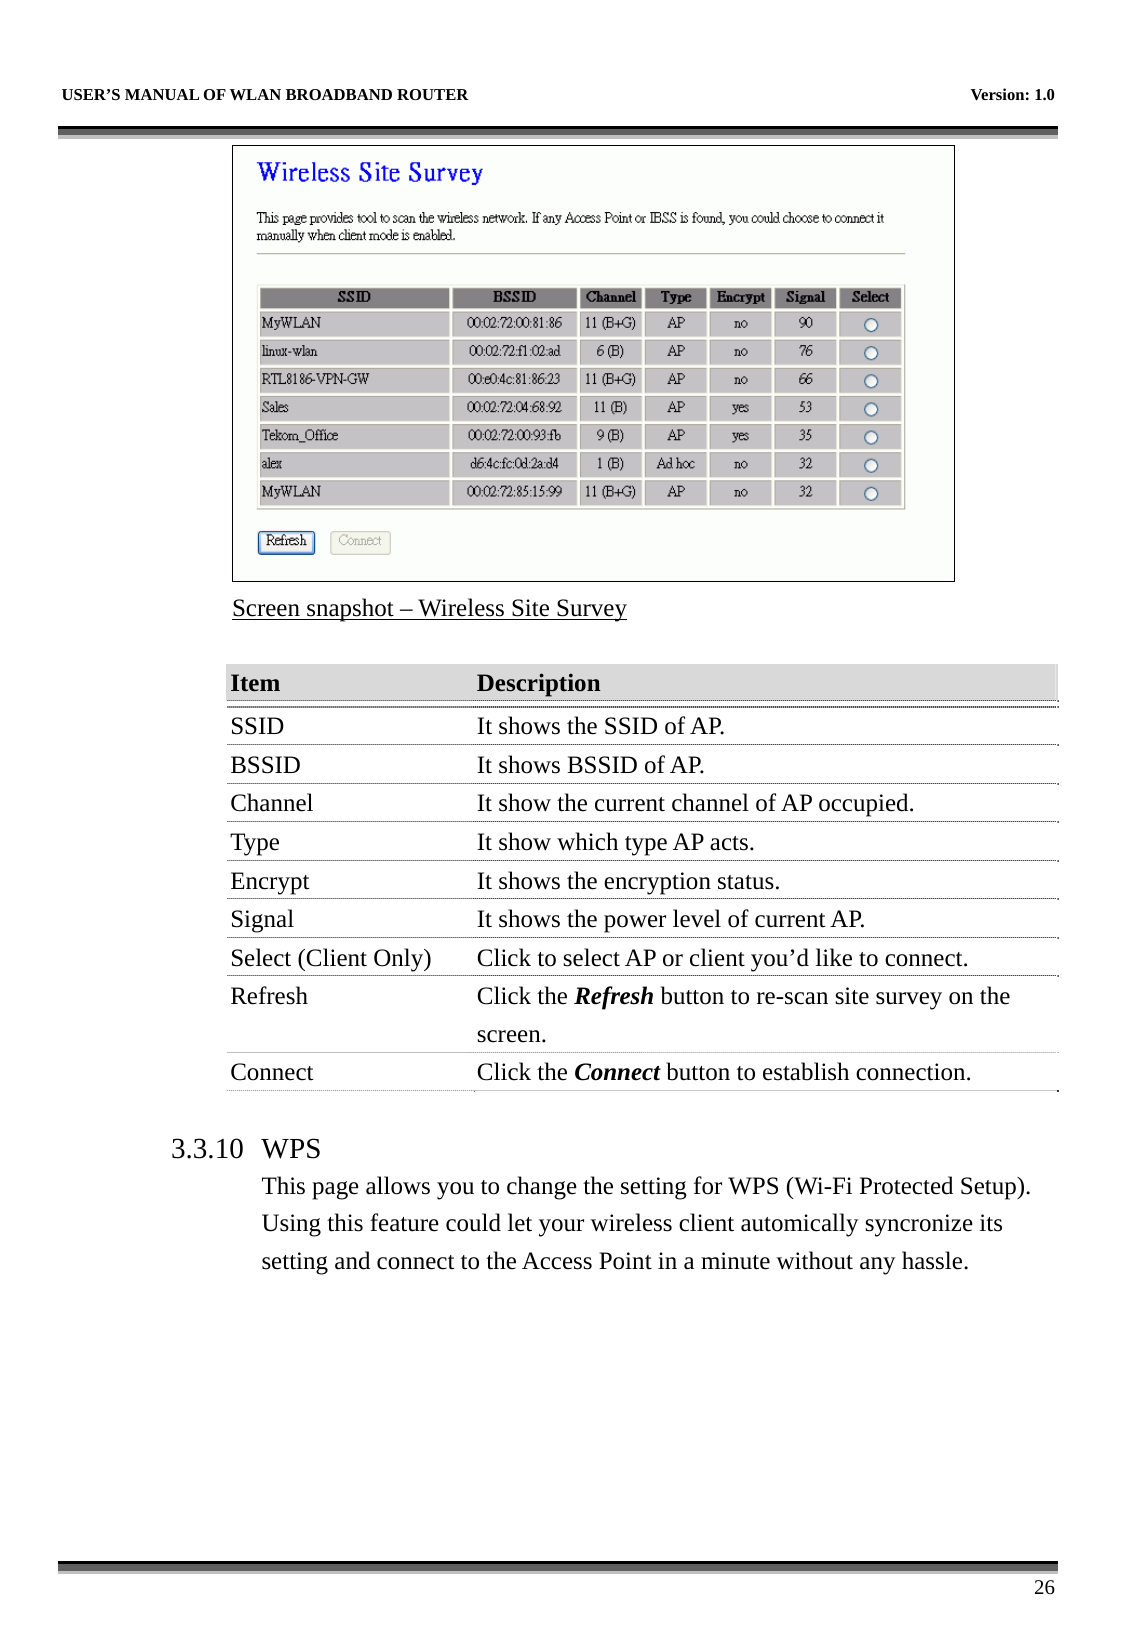   USER’S MANUAL OF WLAN BROADBAND ROUTER    Version: 1.0      26  Screen snapshot – Wireless Site Survey  Item  Description   SSID  It shows the SSID of AP. BSSID  It shows BSSID of AP. Channel  It show the current channel of AP occupied. Type  It show which type AP acts. Encrypt  It shows the encryption status. Signal  It shows the power level of current AP. Select (Client Only)  Click to select AP or client you’d like to connect. Refresh Click the Refresh button to re-scan site survey on the screen. Connect Click the Connect button to establish connection.  3.3.10 WPS This page allows you to change the setting for WPS (Wi-Fi Protected Setup). Using this feature could let your wireless client automically syncronize its setting and connect to the Access Point in a minute without any hassle.   